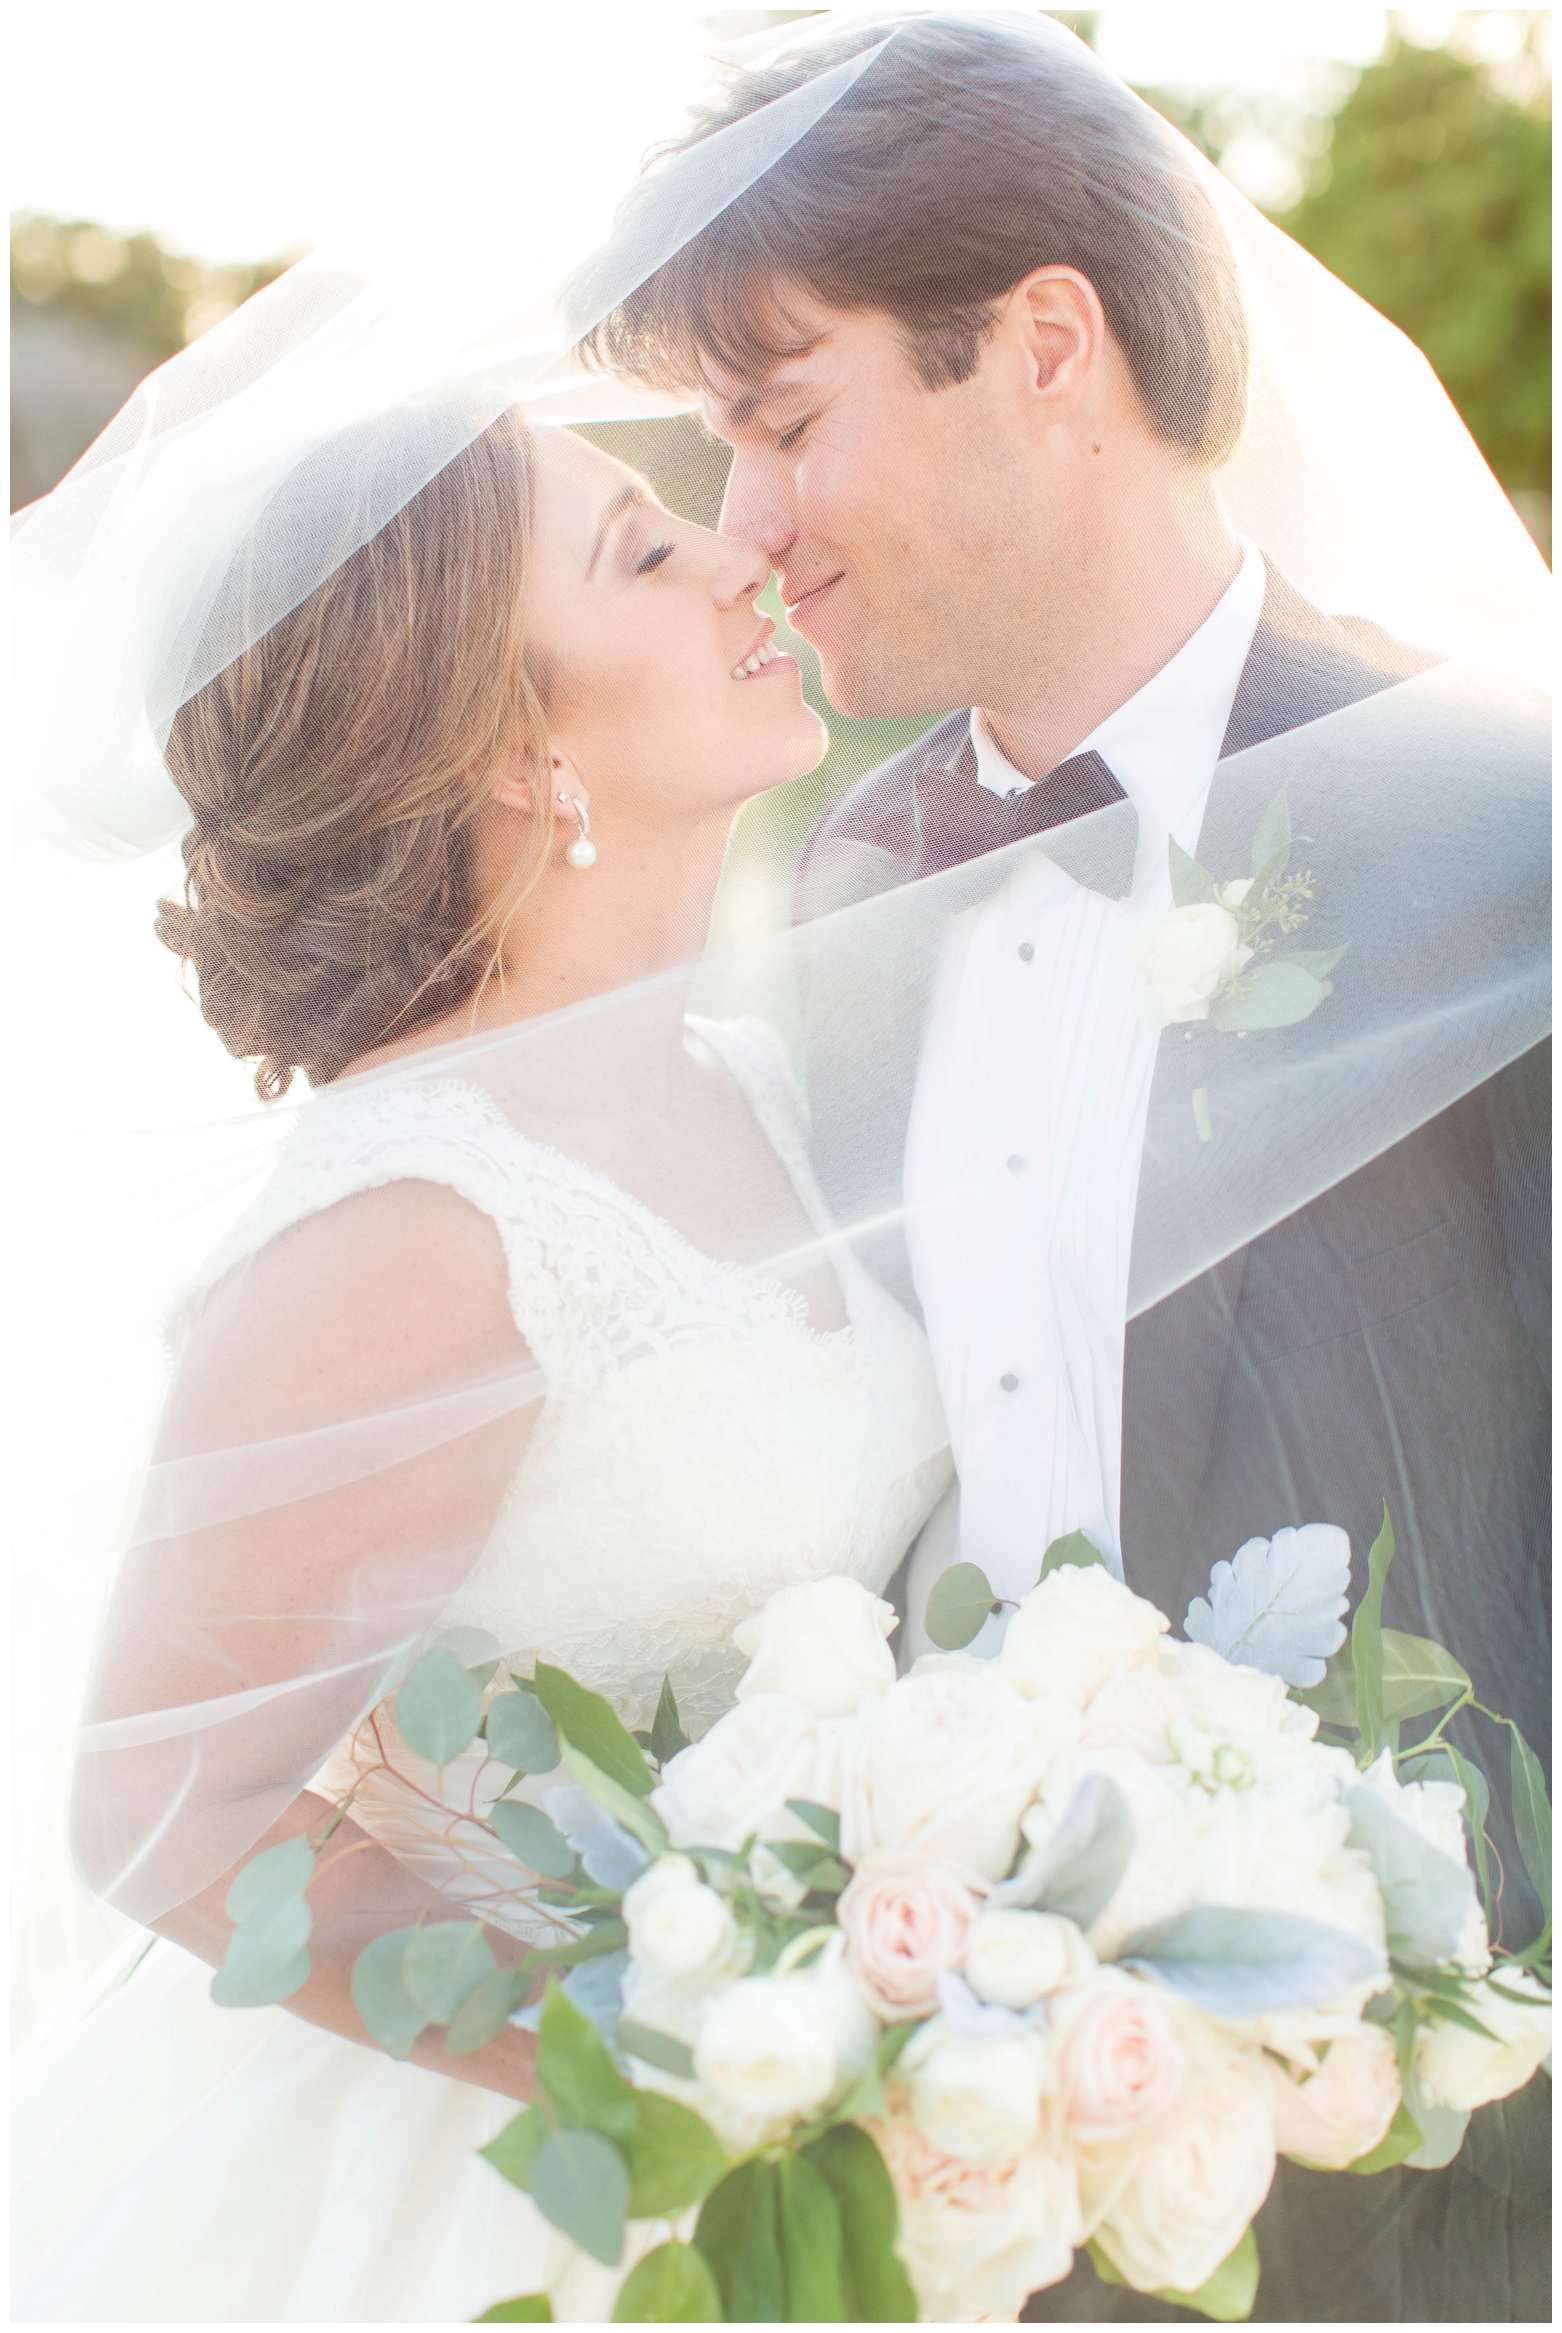 View More: http://hopetaylorphotographyphotos.pass.us/kelley-and-perry-wedding